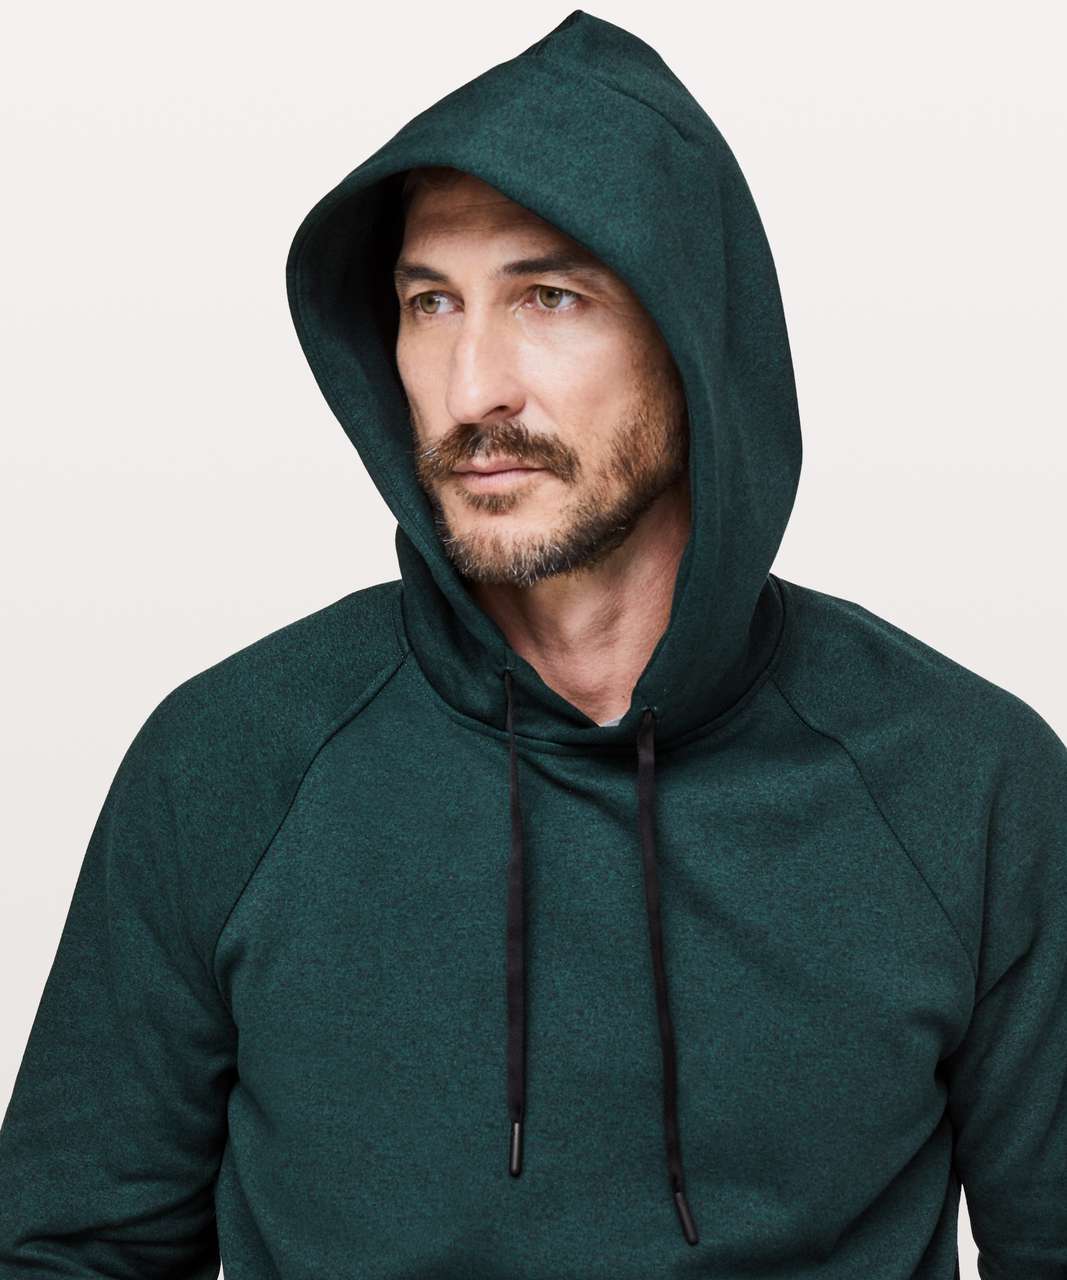 Lululemon City Sweat Pullover Hoodie *Thermo - Heathered Royal Emerald